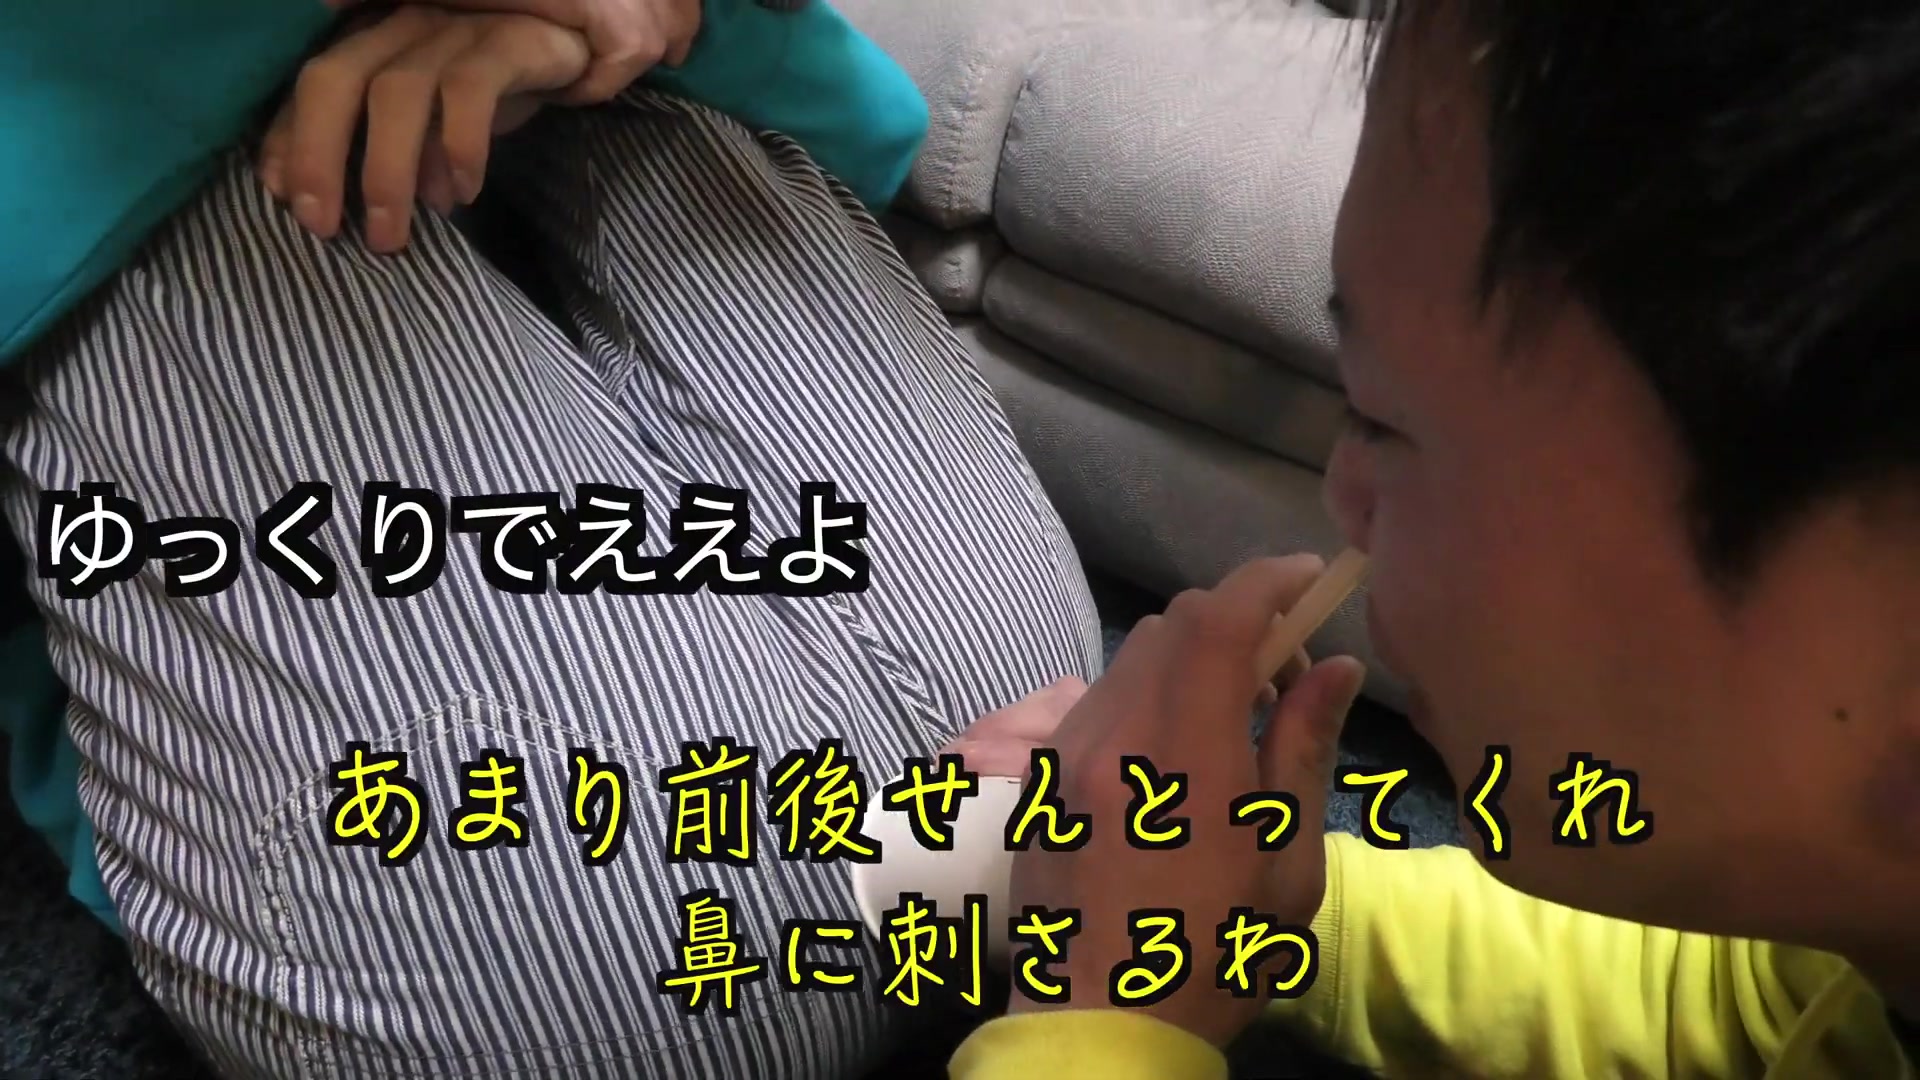 Japanese Fart-eating YouTuber returns with new "tools" (part 2)